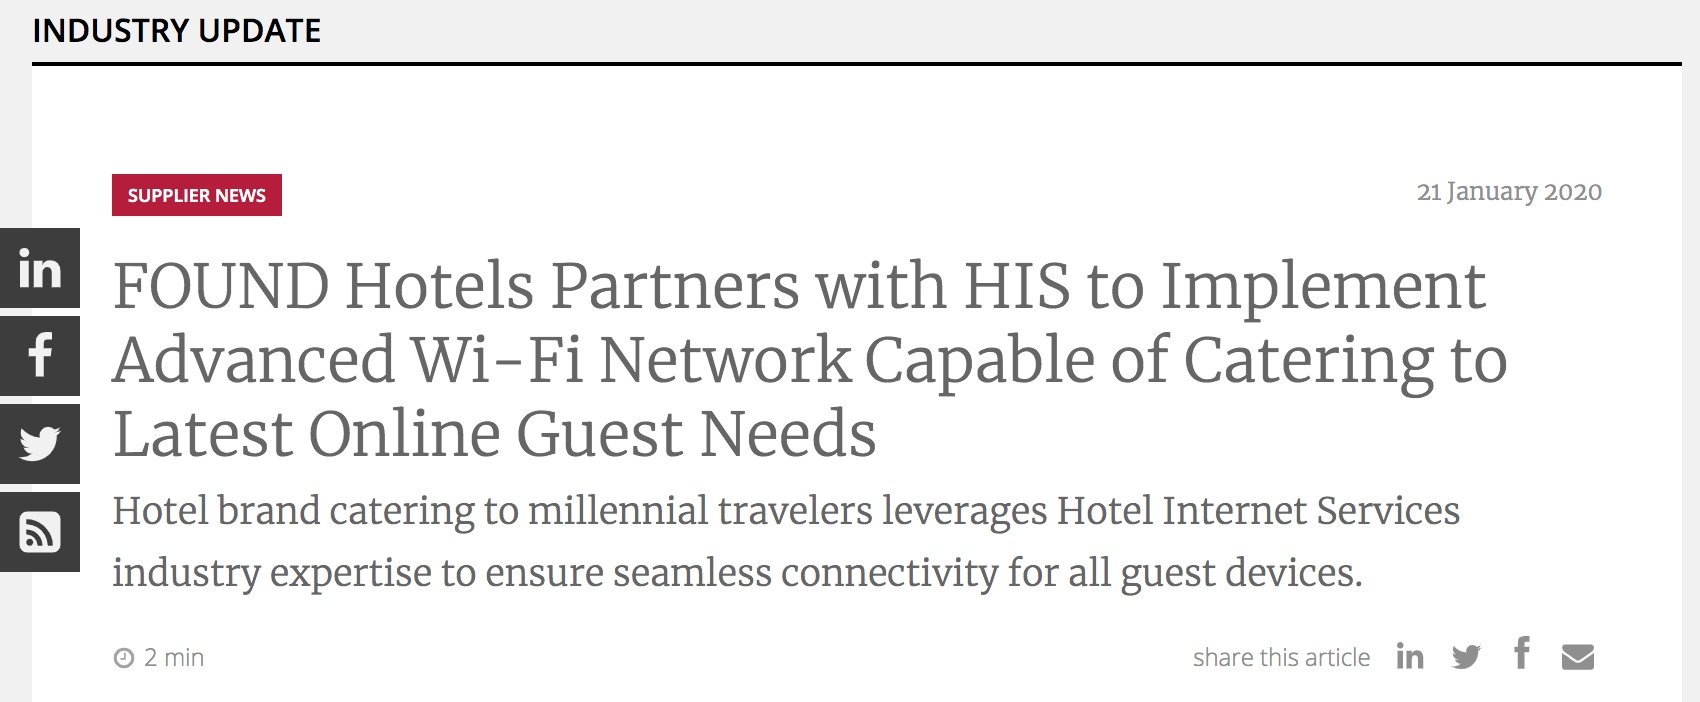 FOUND Hotels Partners with HIS to Implement Advanced Wi-Fi Network Capable of Catering to Latest Online Guest Needs Hotel brand catering to millennial travelers leverages Hotel Internet Services industry expertise to ensure seamless connectivity for all guest devices.